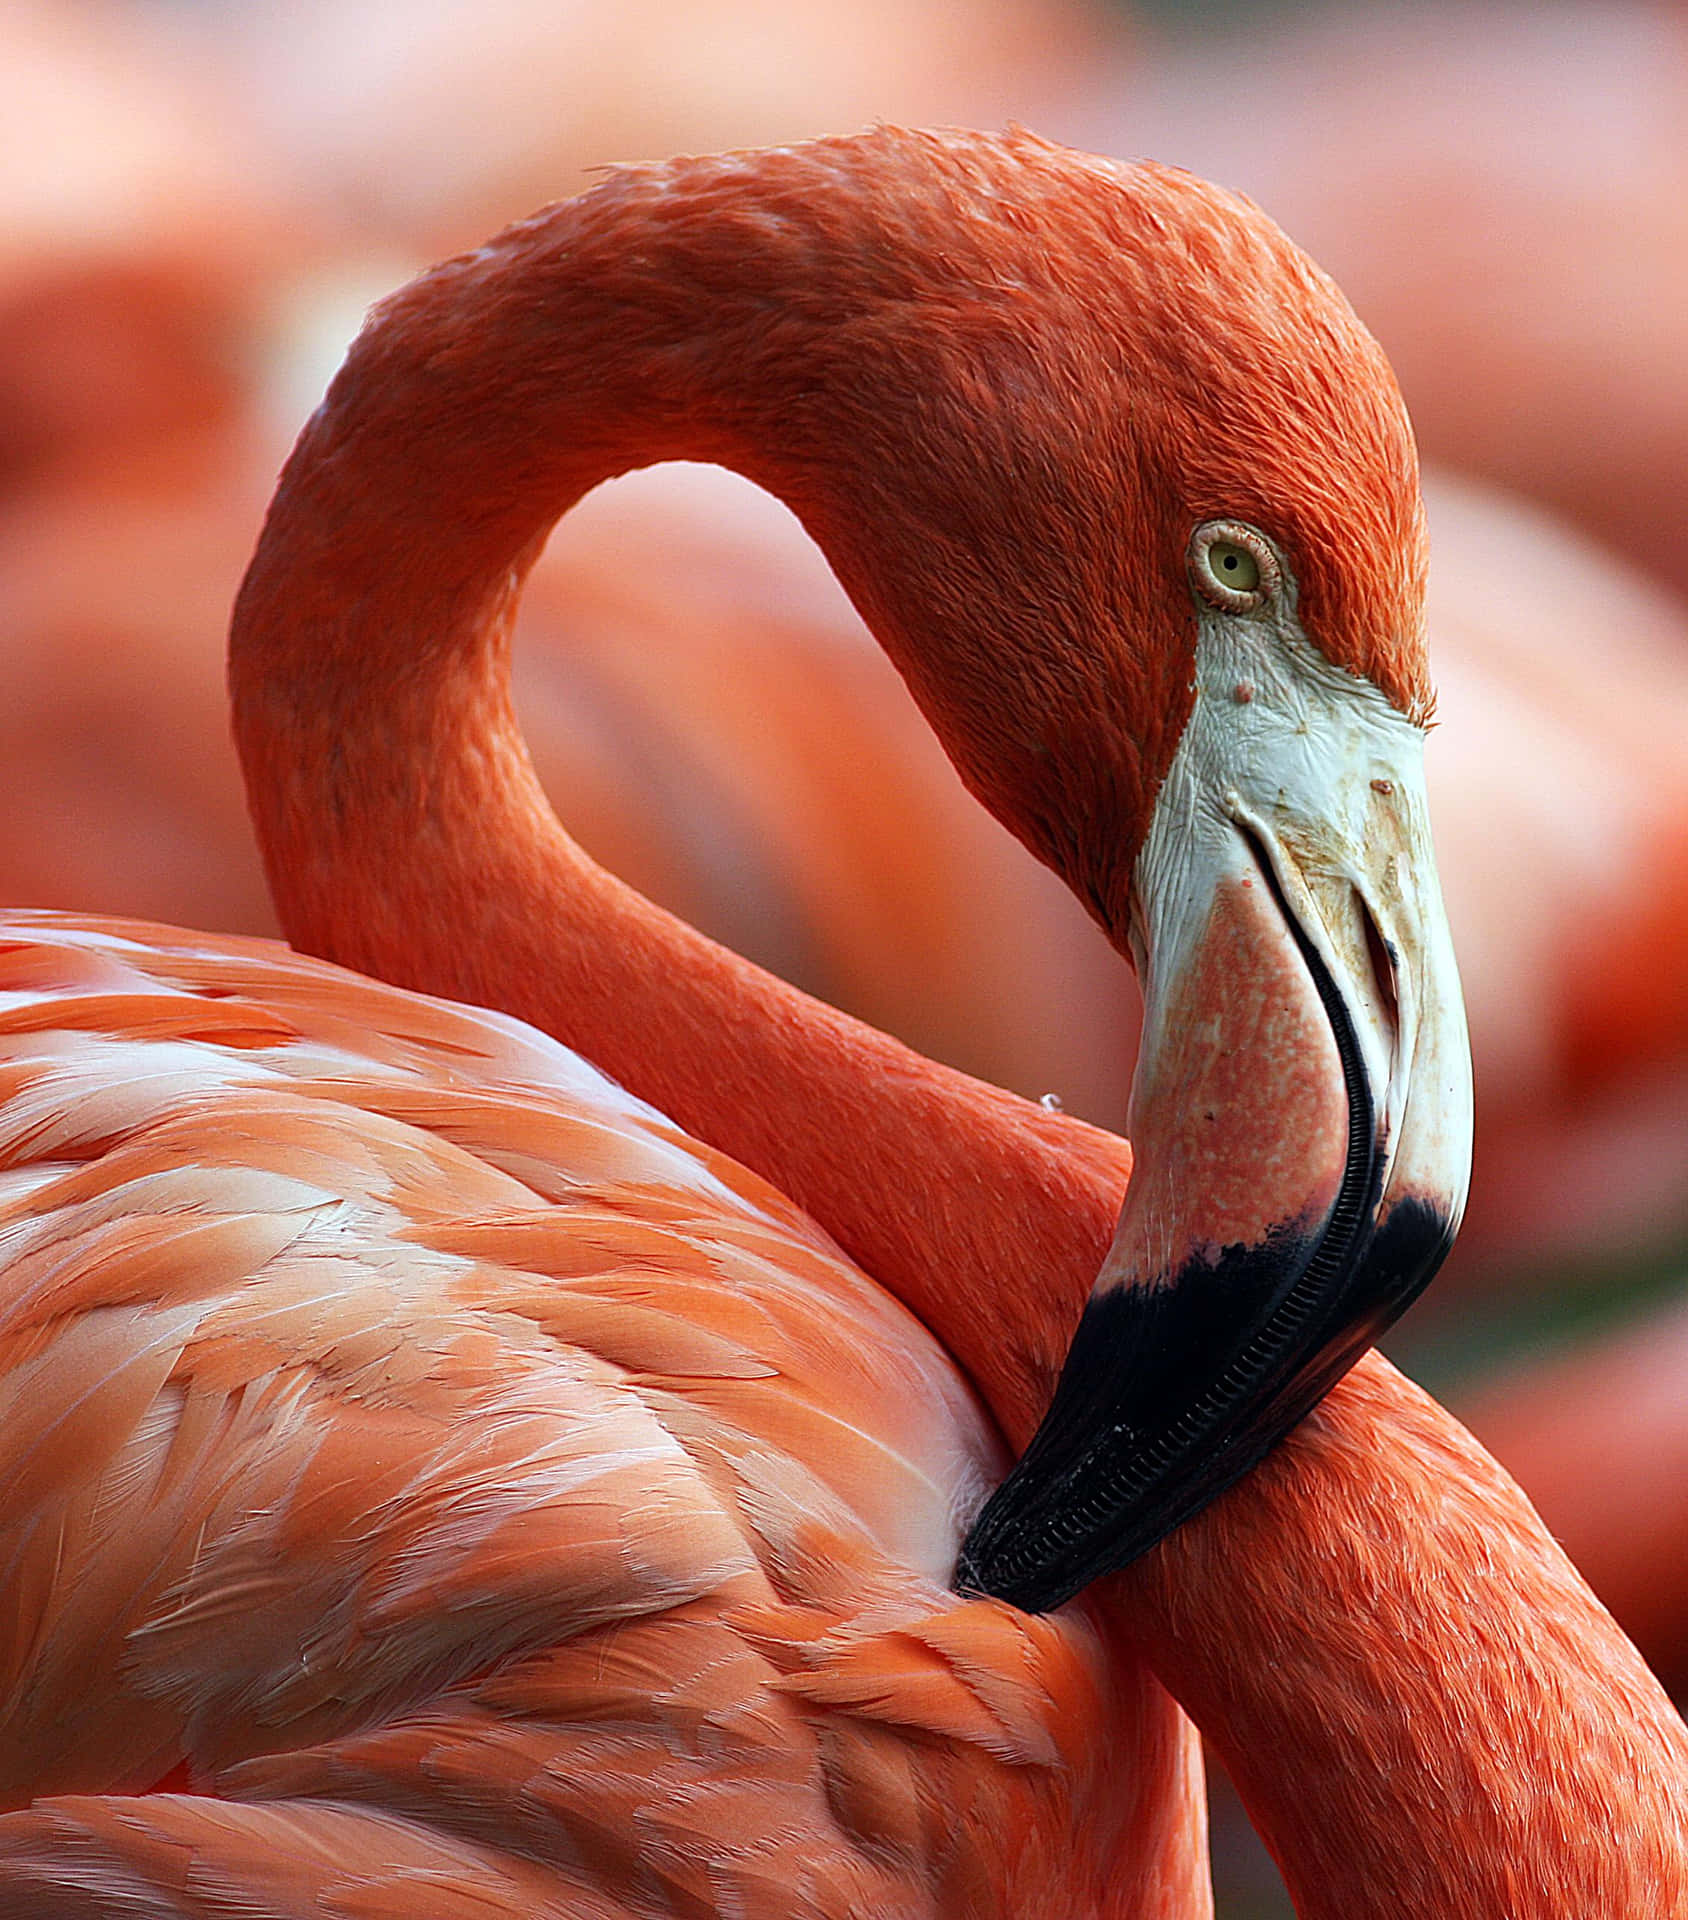 Striking in pink, a majestic Flamingo on display